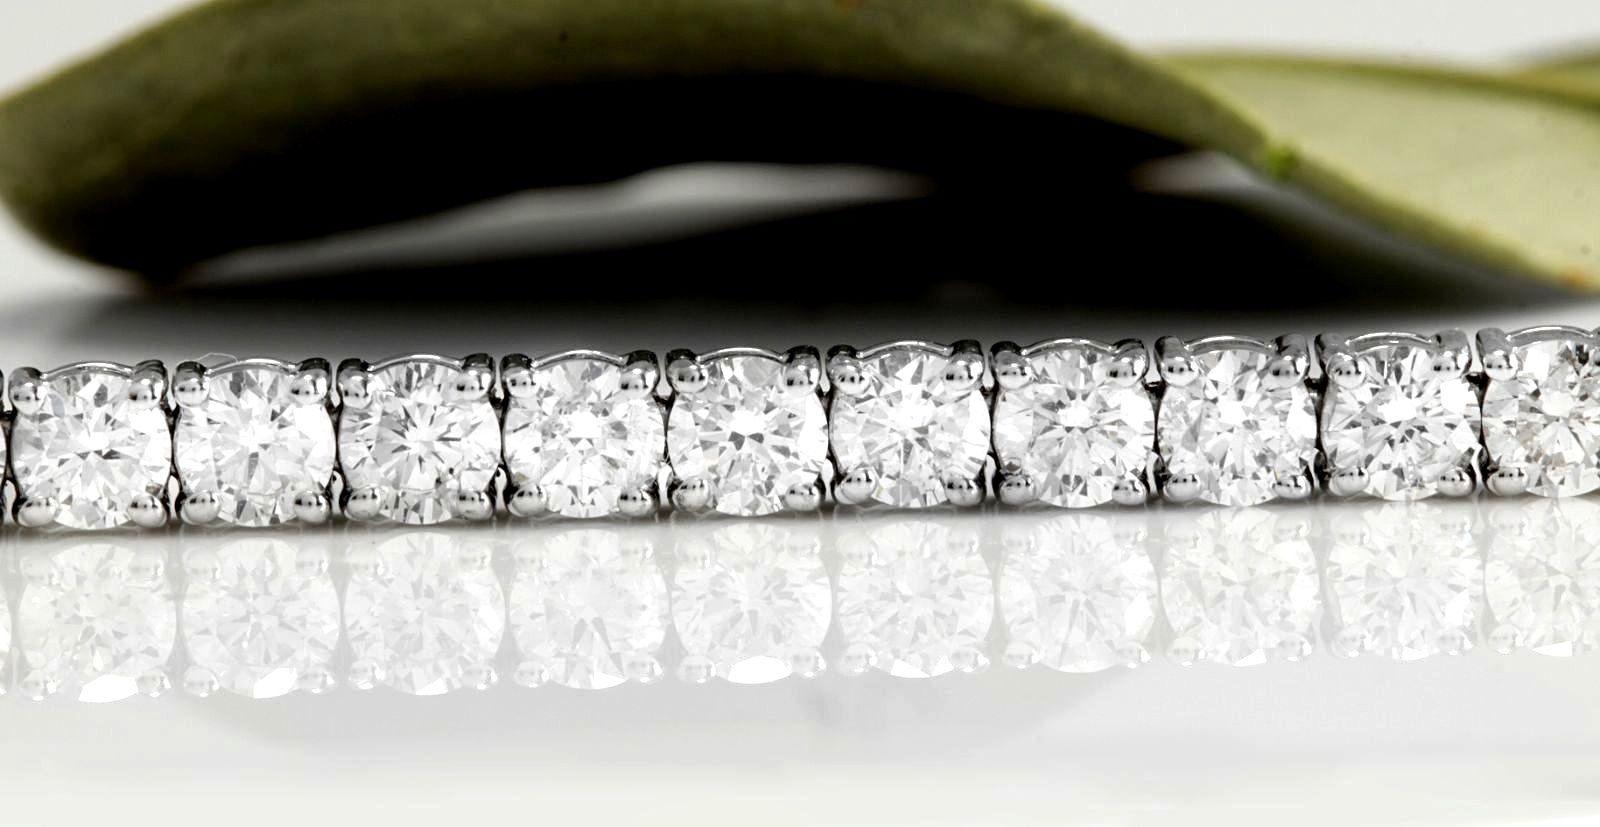 Very Impressive 3.15 Carats Natural Diamond 14K Solid White Gold Bracelet

STAMPED: 14K

Total Natural Round Diamonds Weight: Approx. 3.15 Carats (color H / Clarity VS2-SI2)

Bracelet Length is: 7 inches

Width: 2.4mm

Bracelet total weight: Approx.